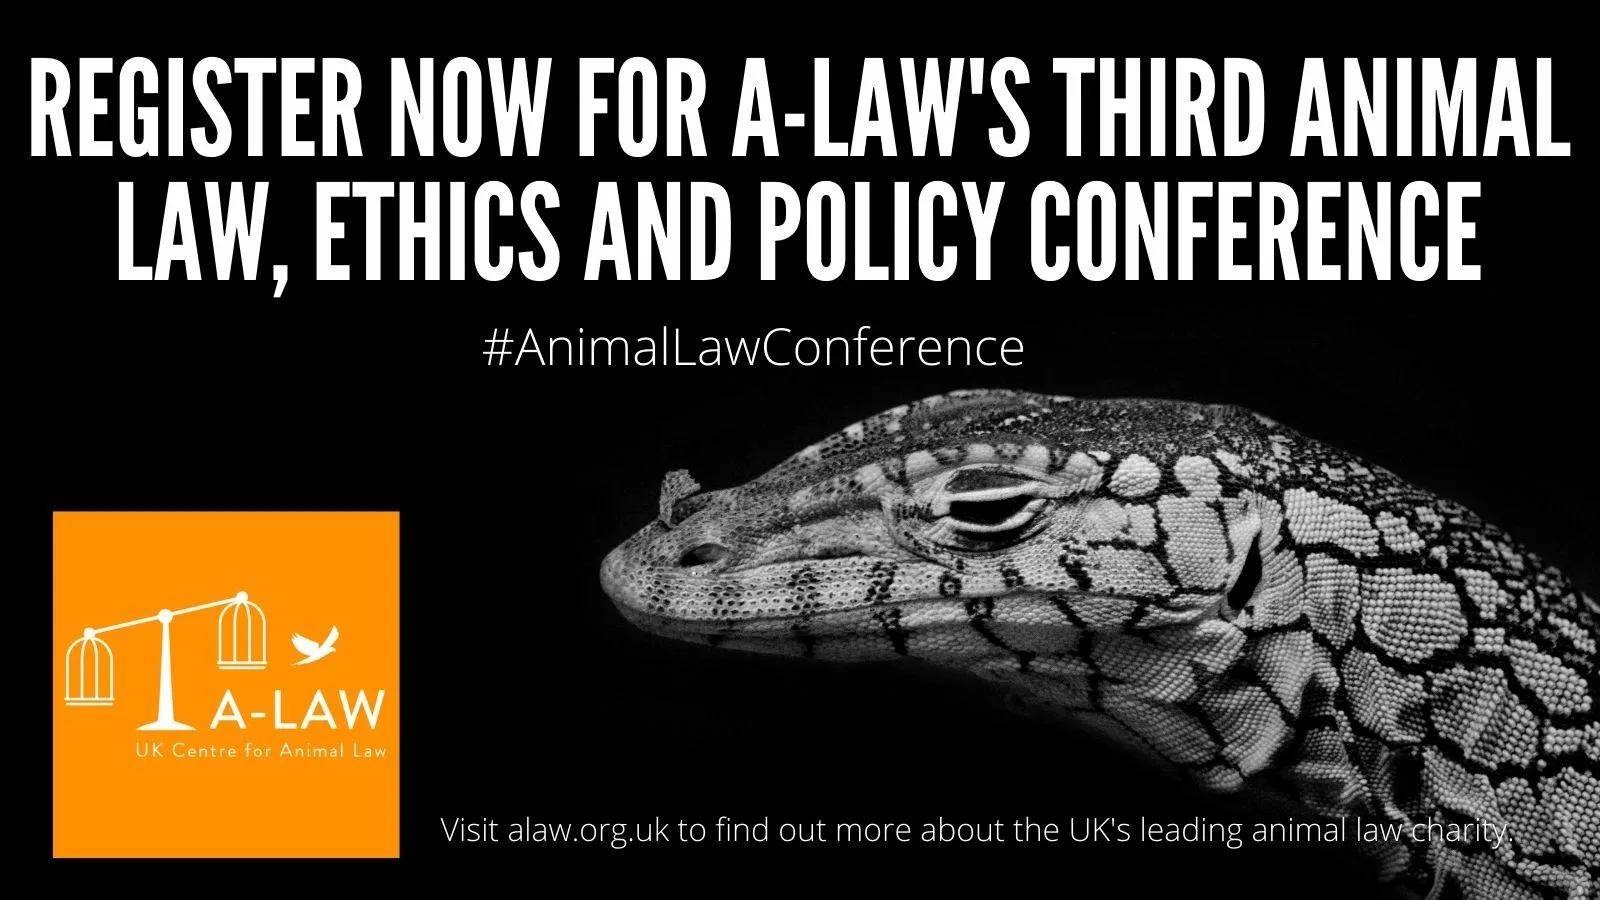 A Law Conference poster with reptile